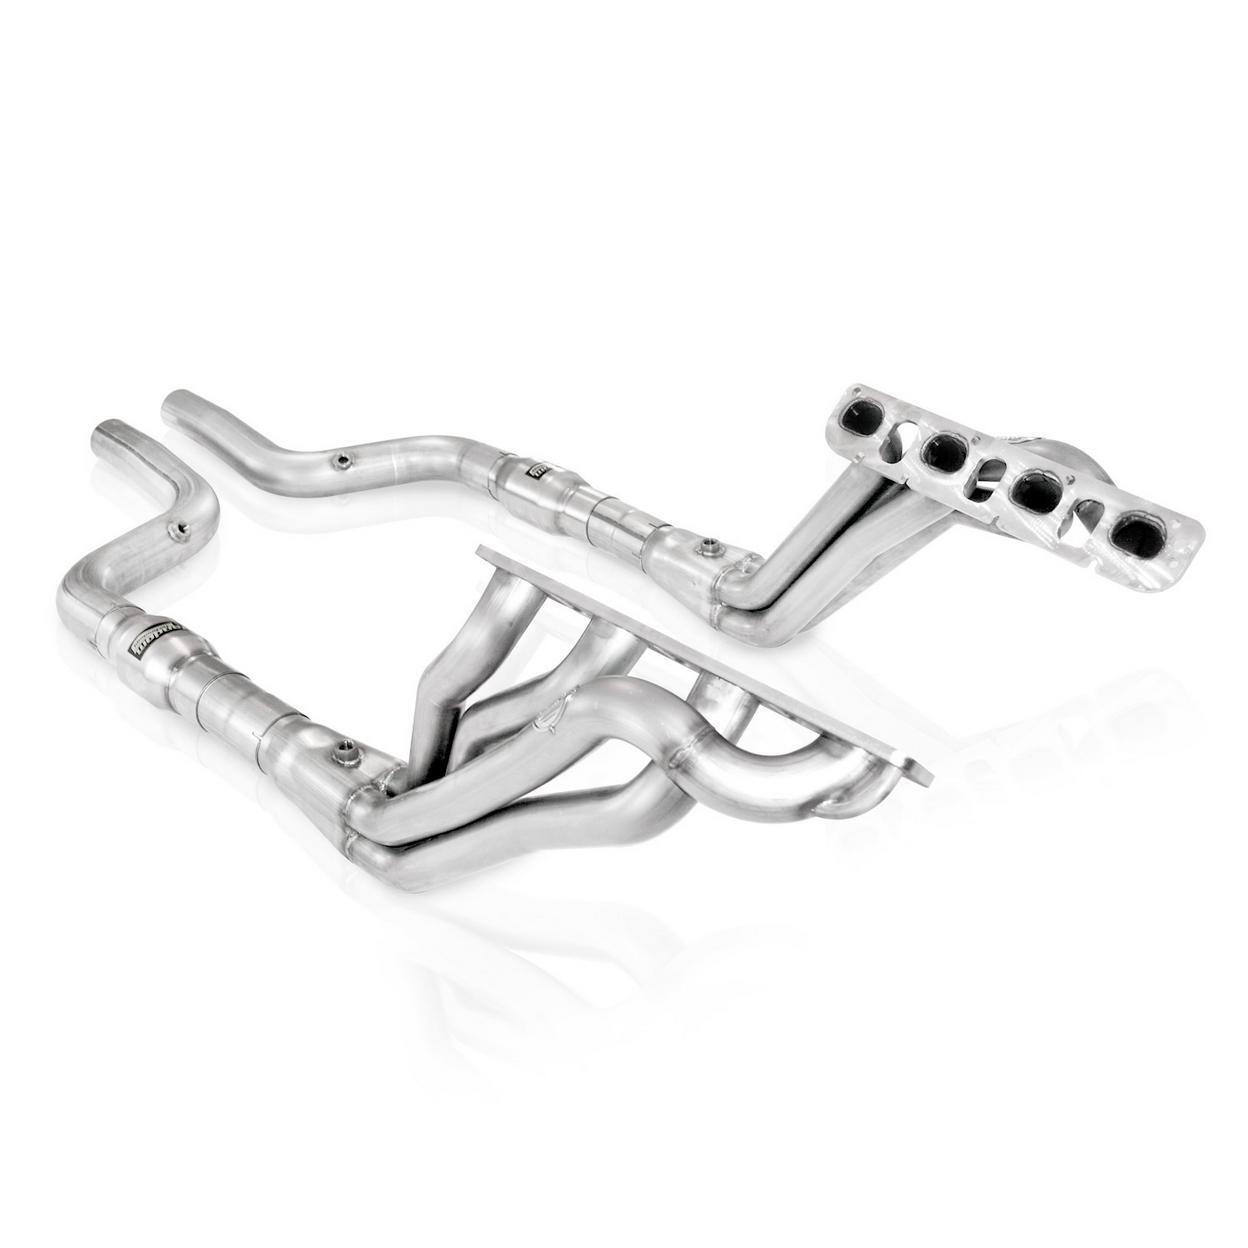 Stainless Works HM64HDRCAT-TL Stainless Works Headers 1-7/8